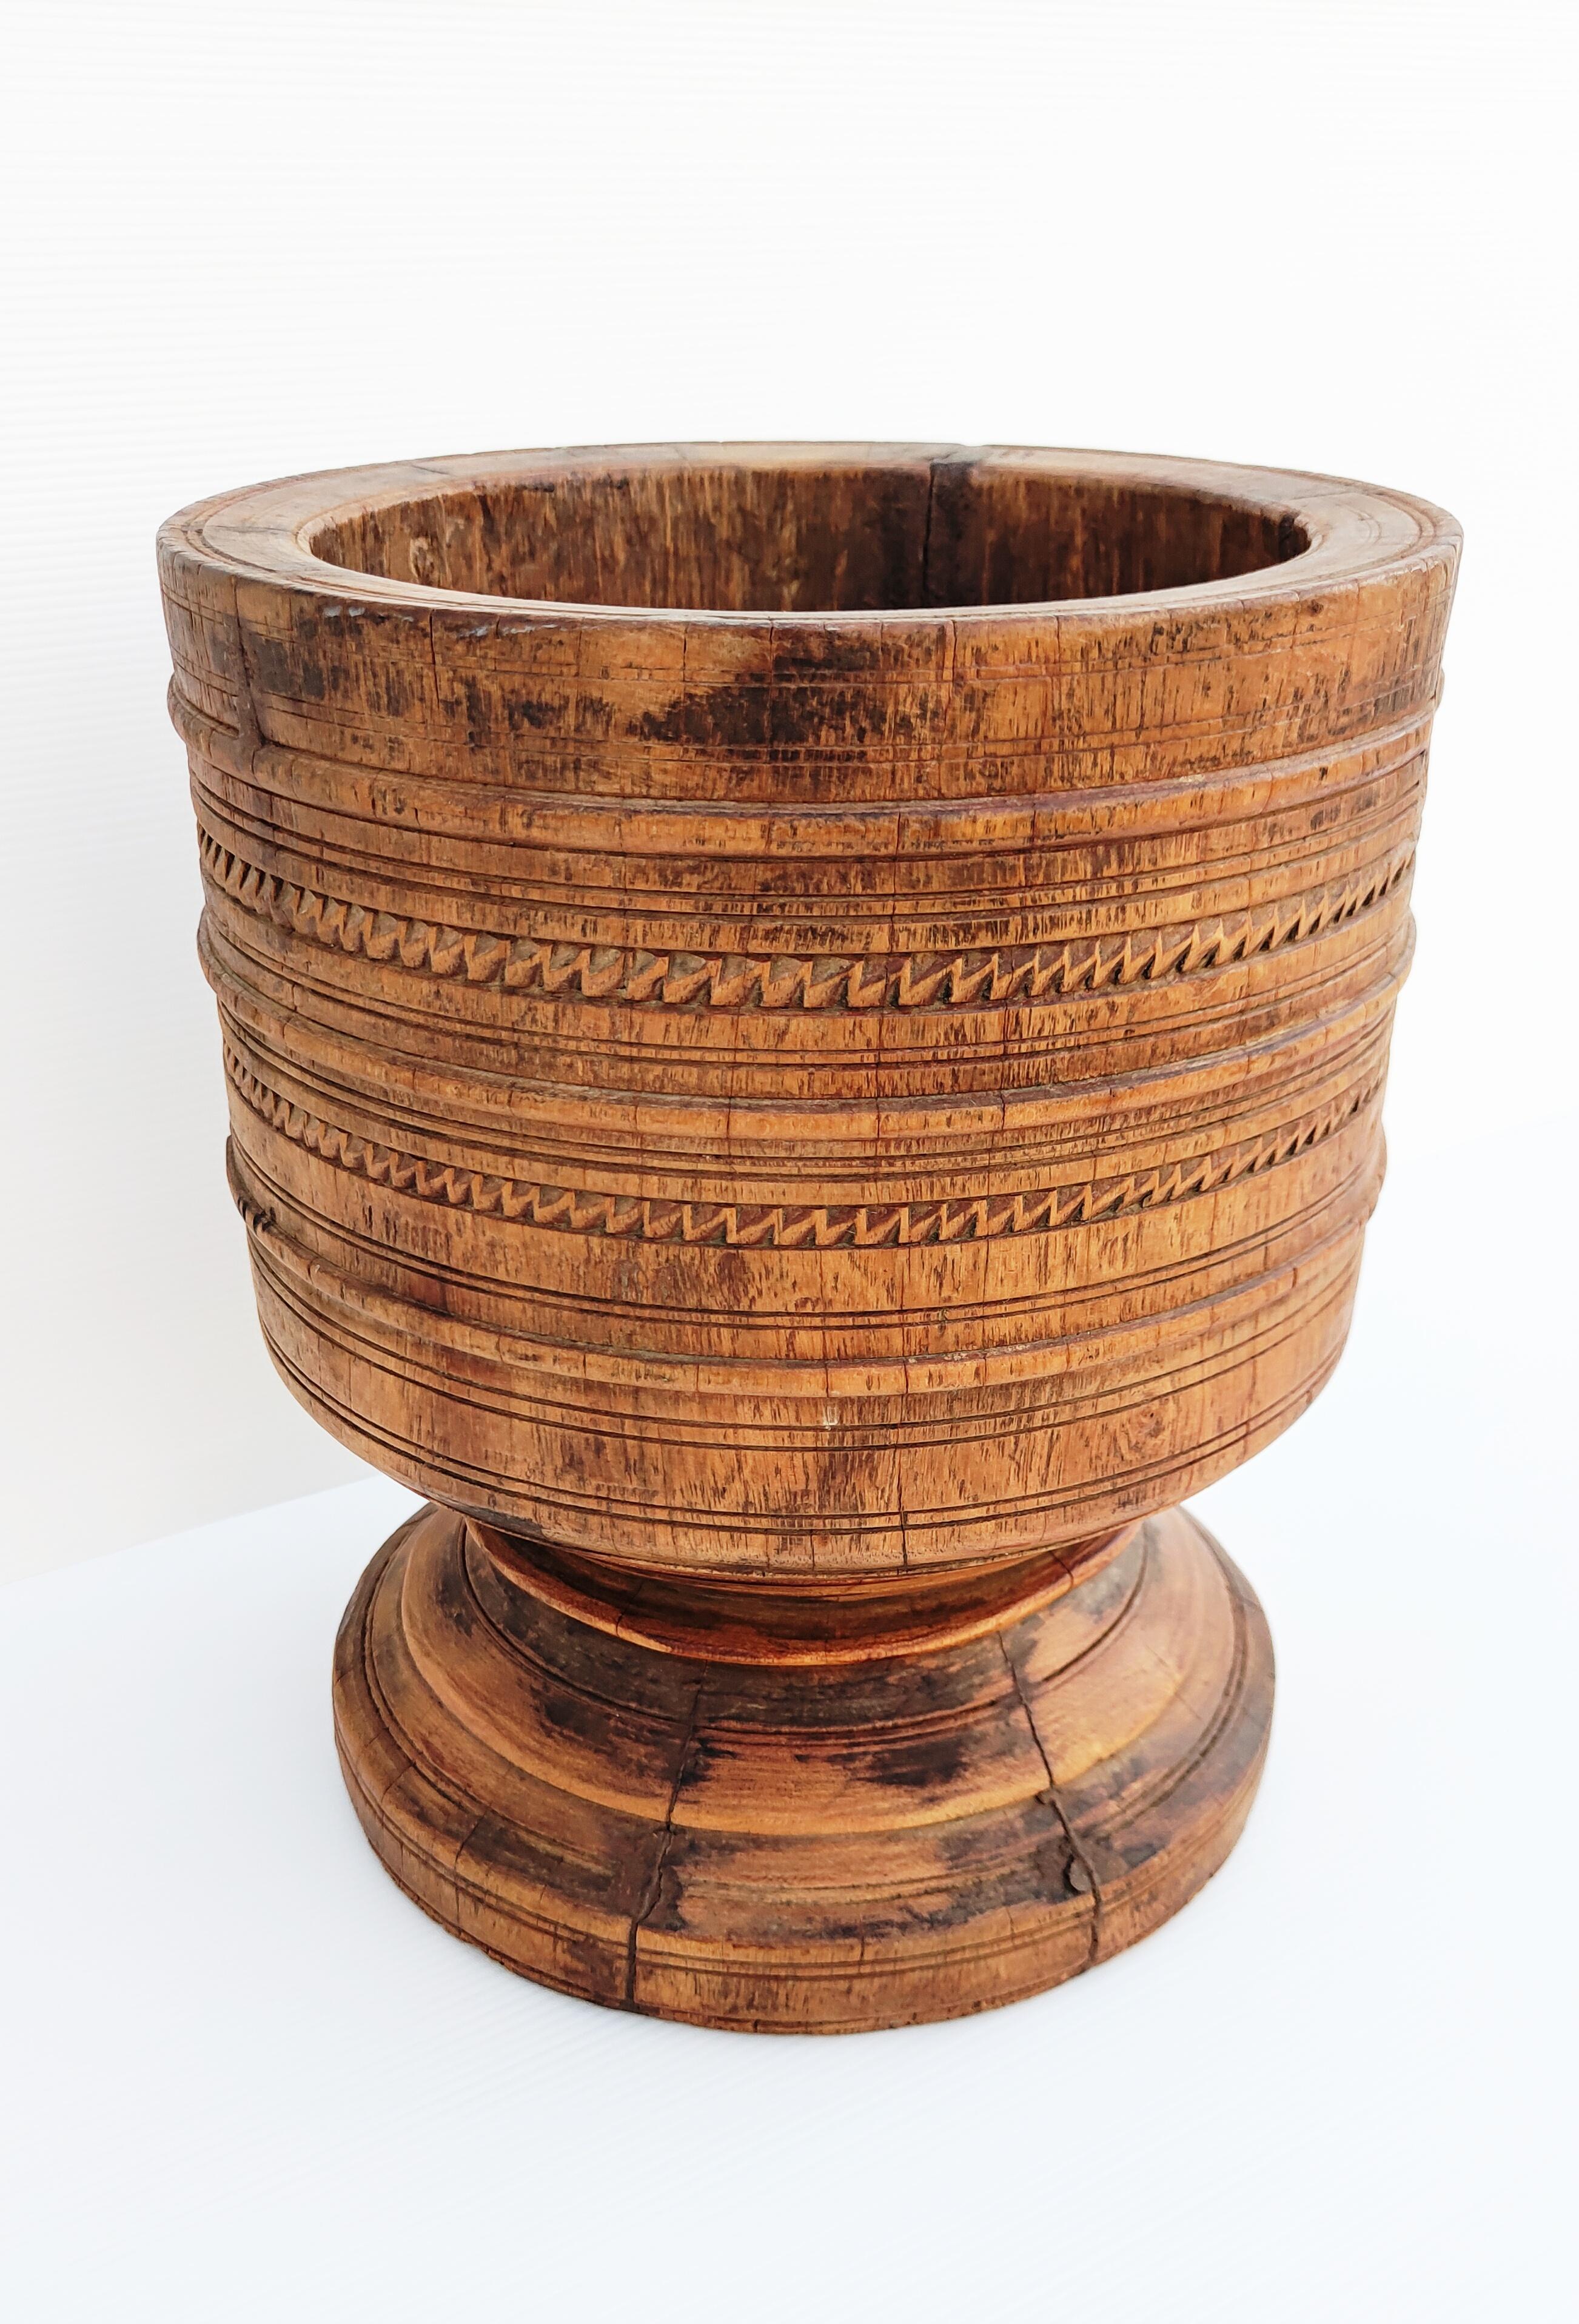 Large Wooden African Mortar Bowl, 1950s For Sale 6